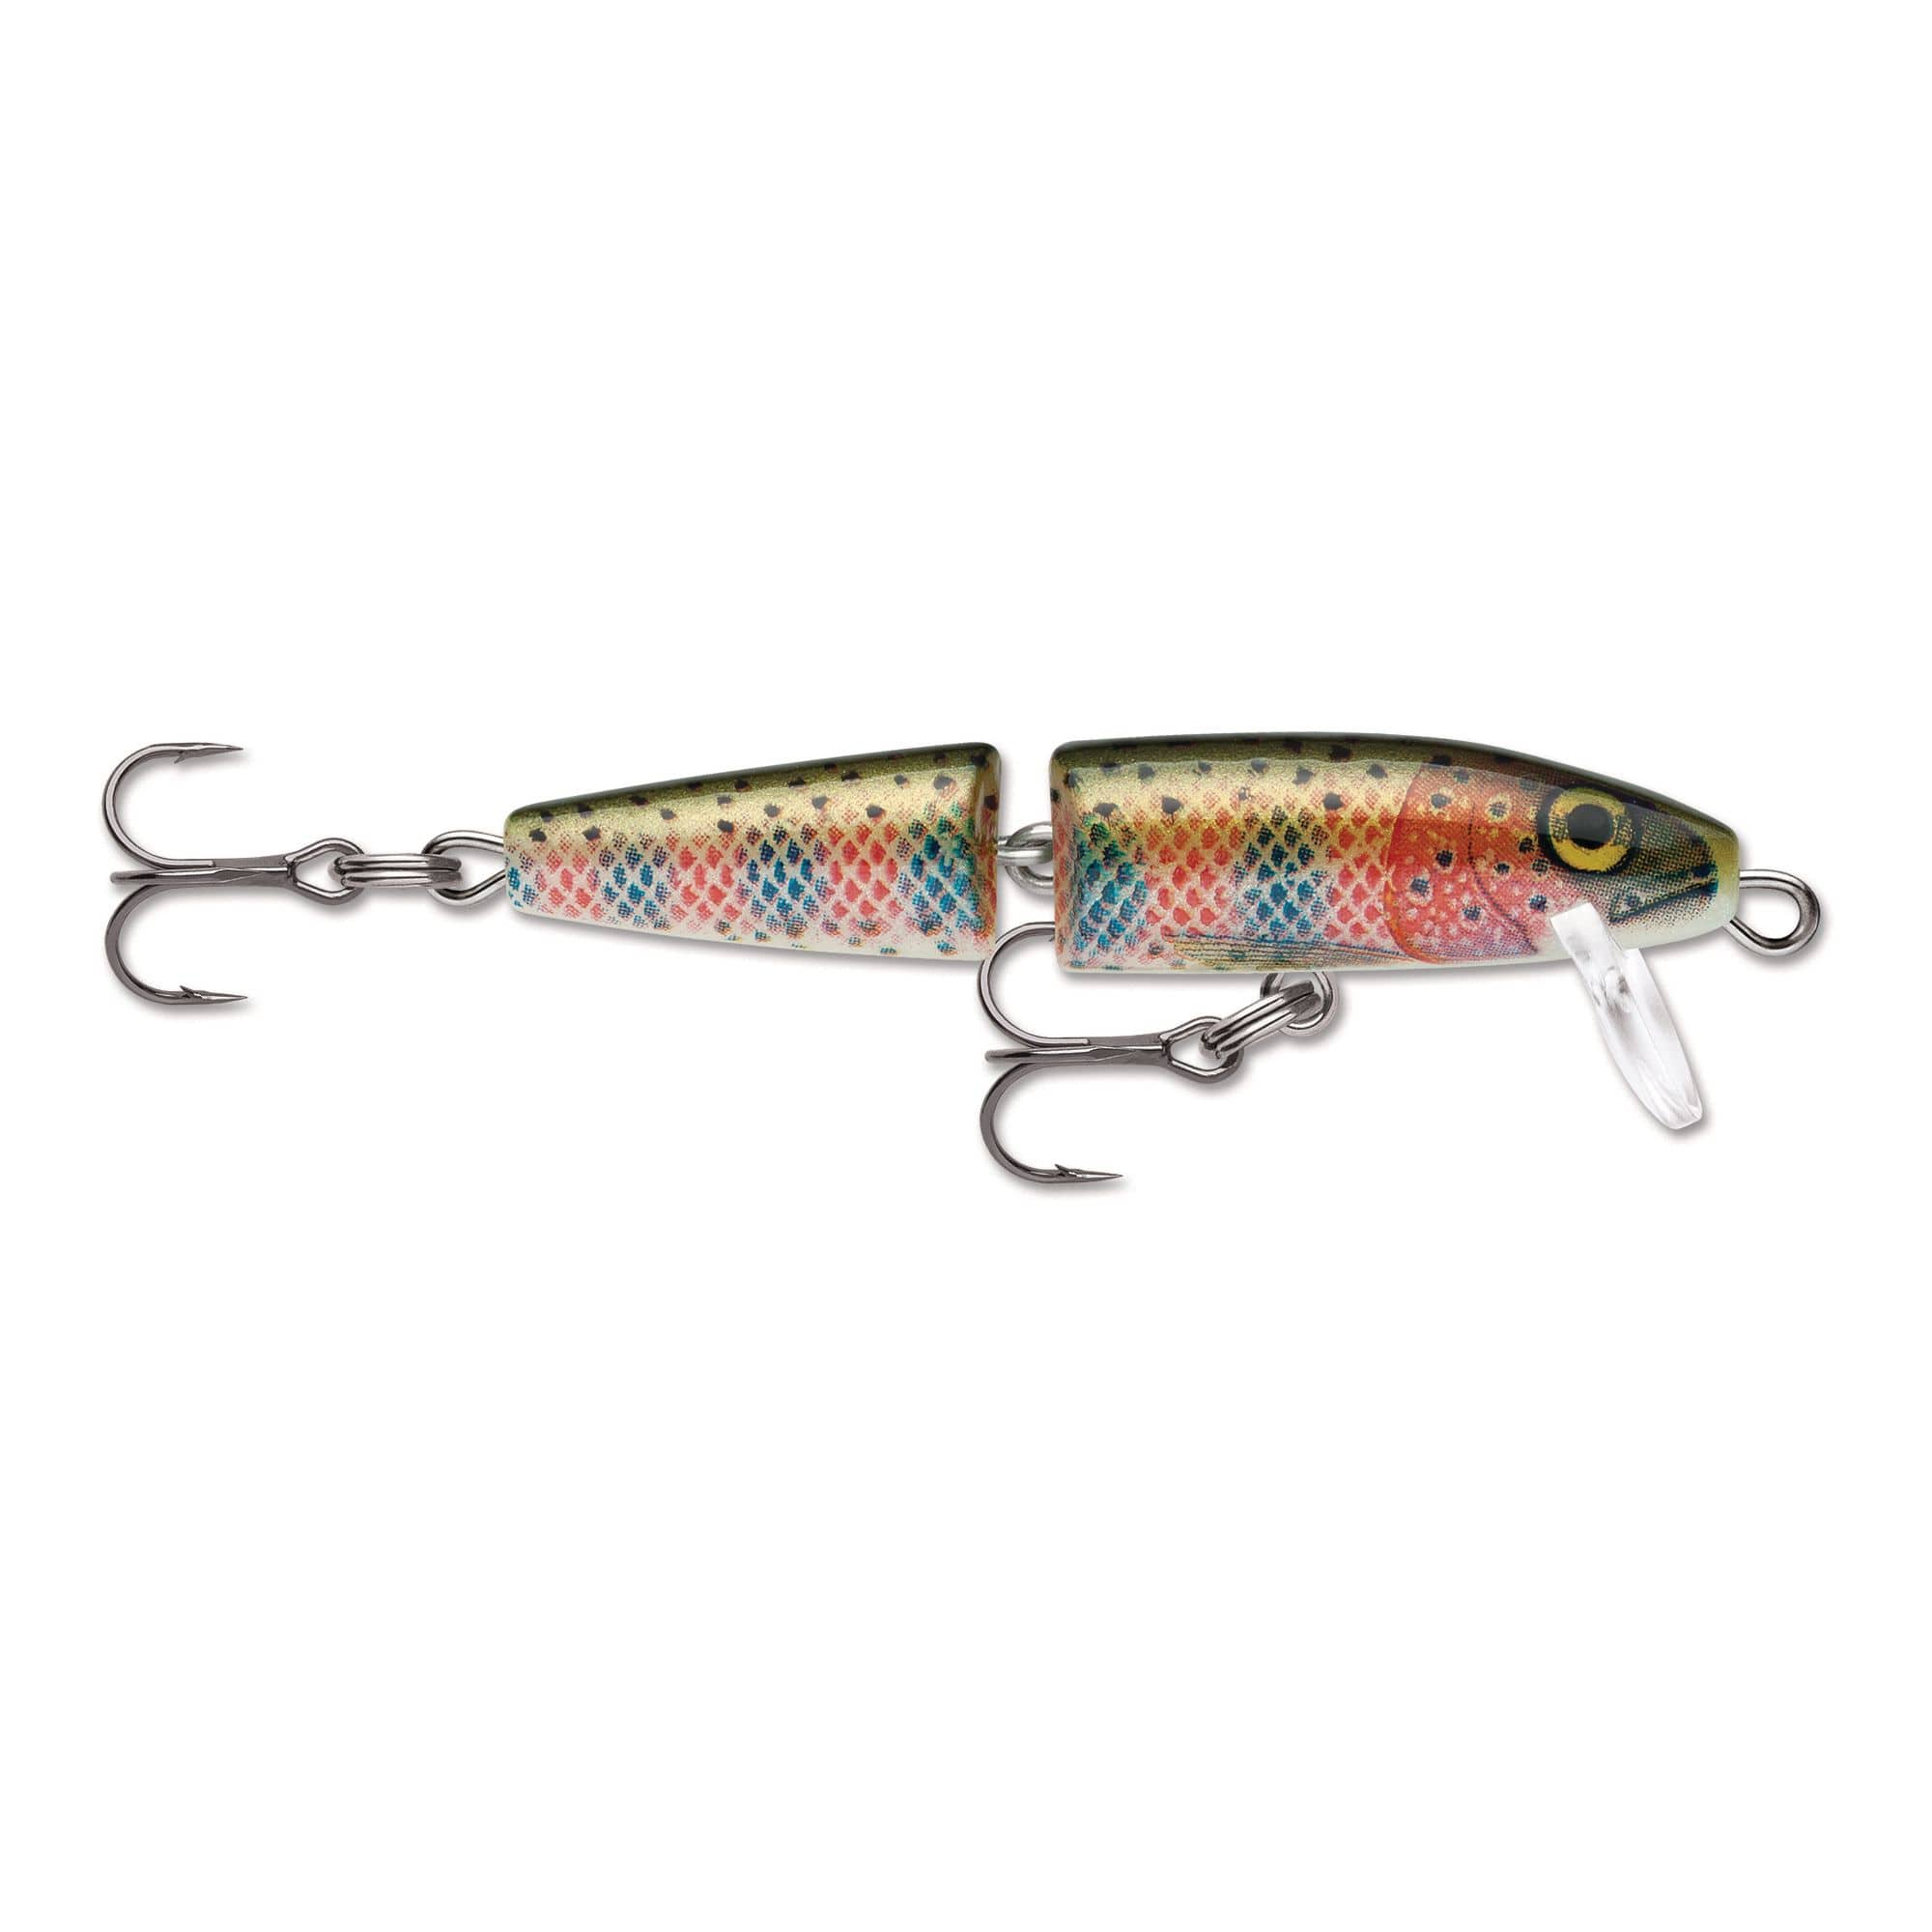 Rapala Jointed Fishing Lure, 2-in